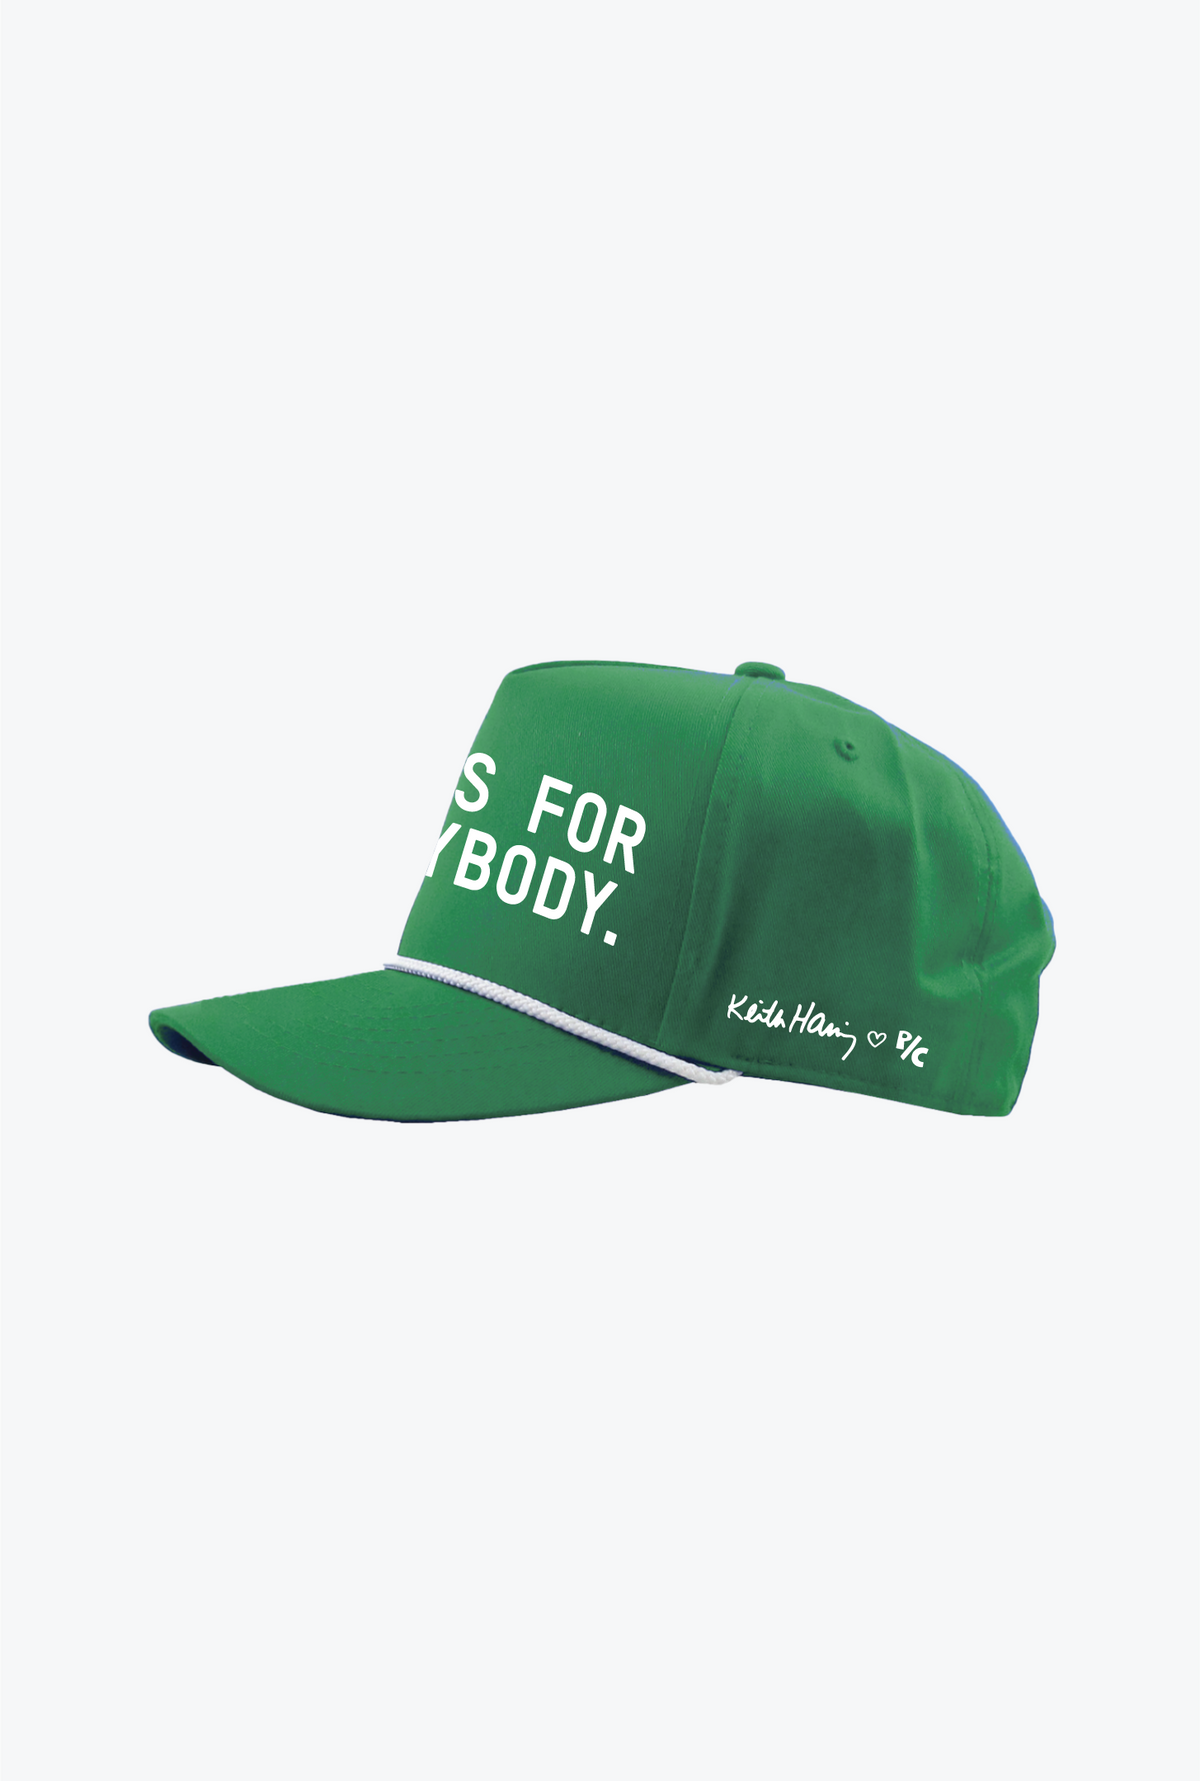 P/C x Keith Haring Art if r A-Frame Cap - Kelly Green